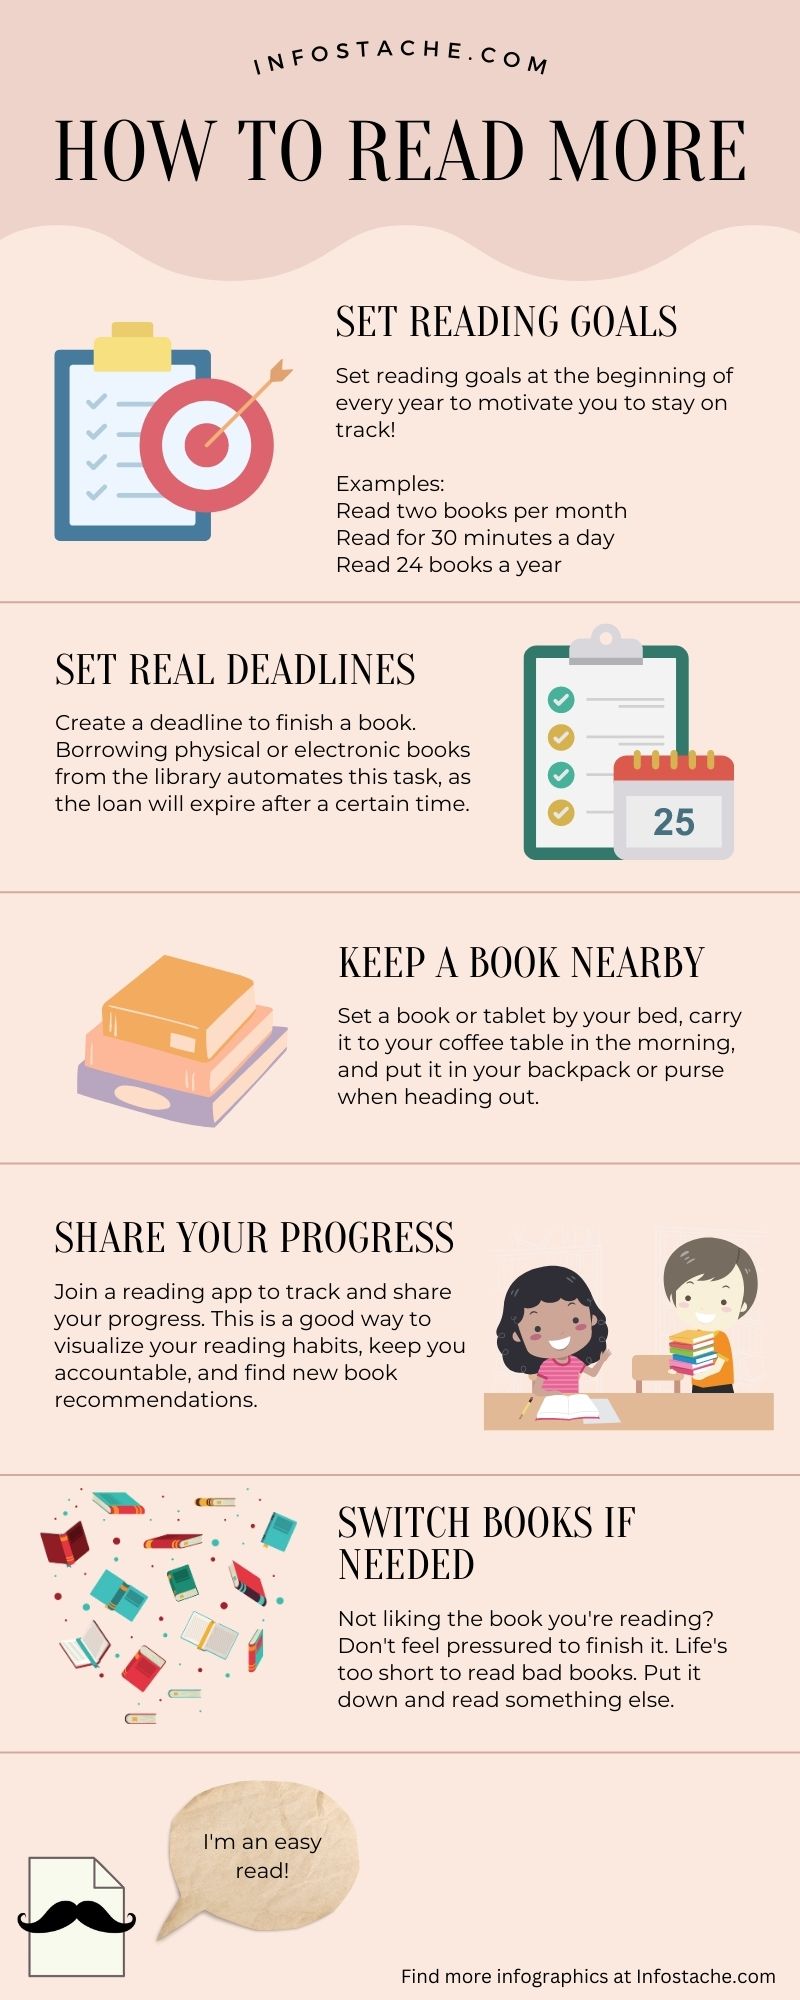 How to read more infographic